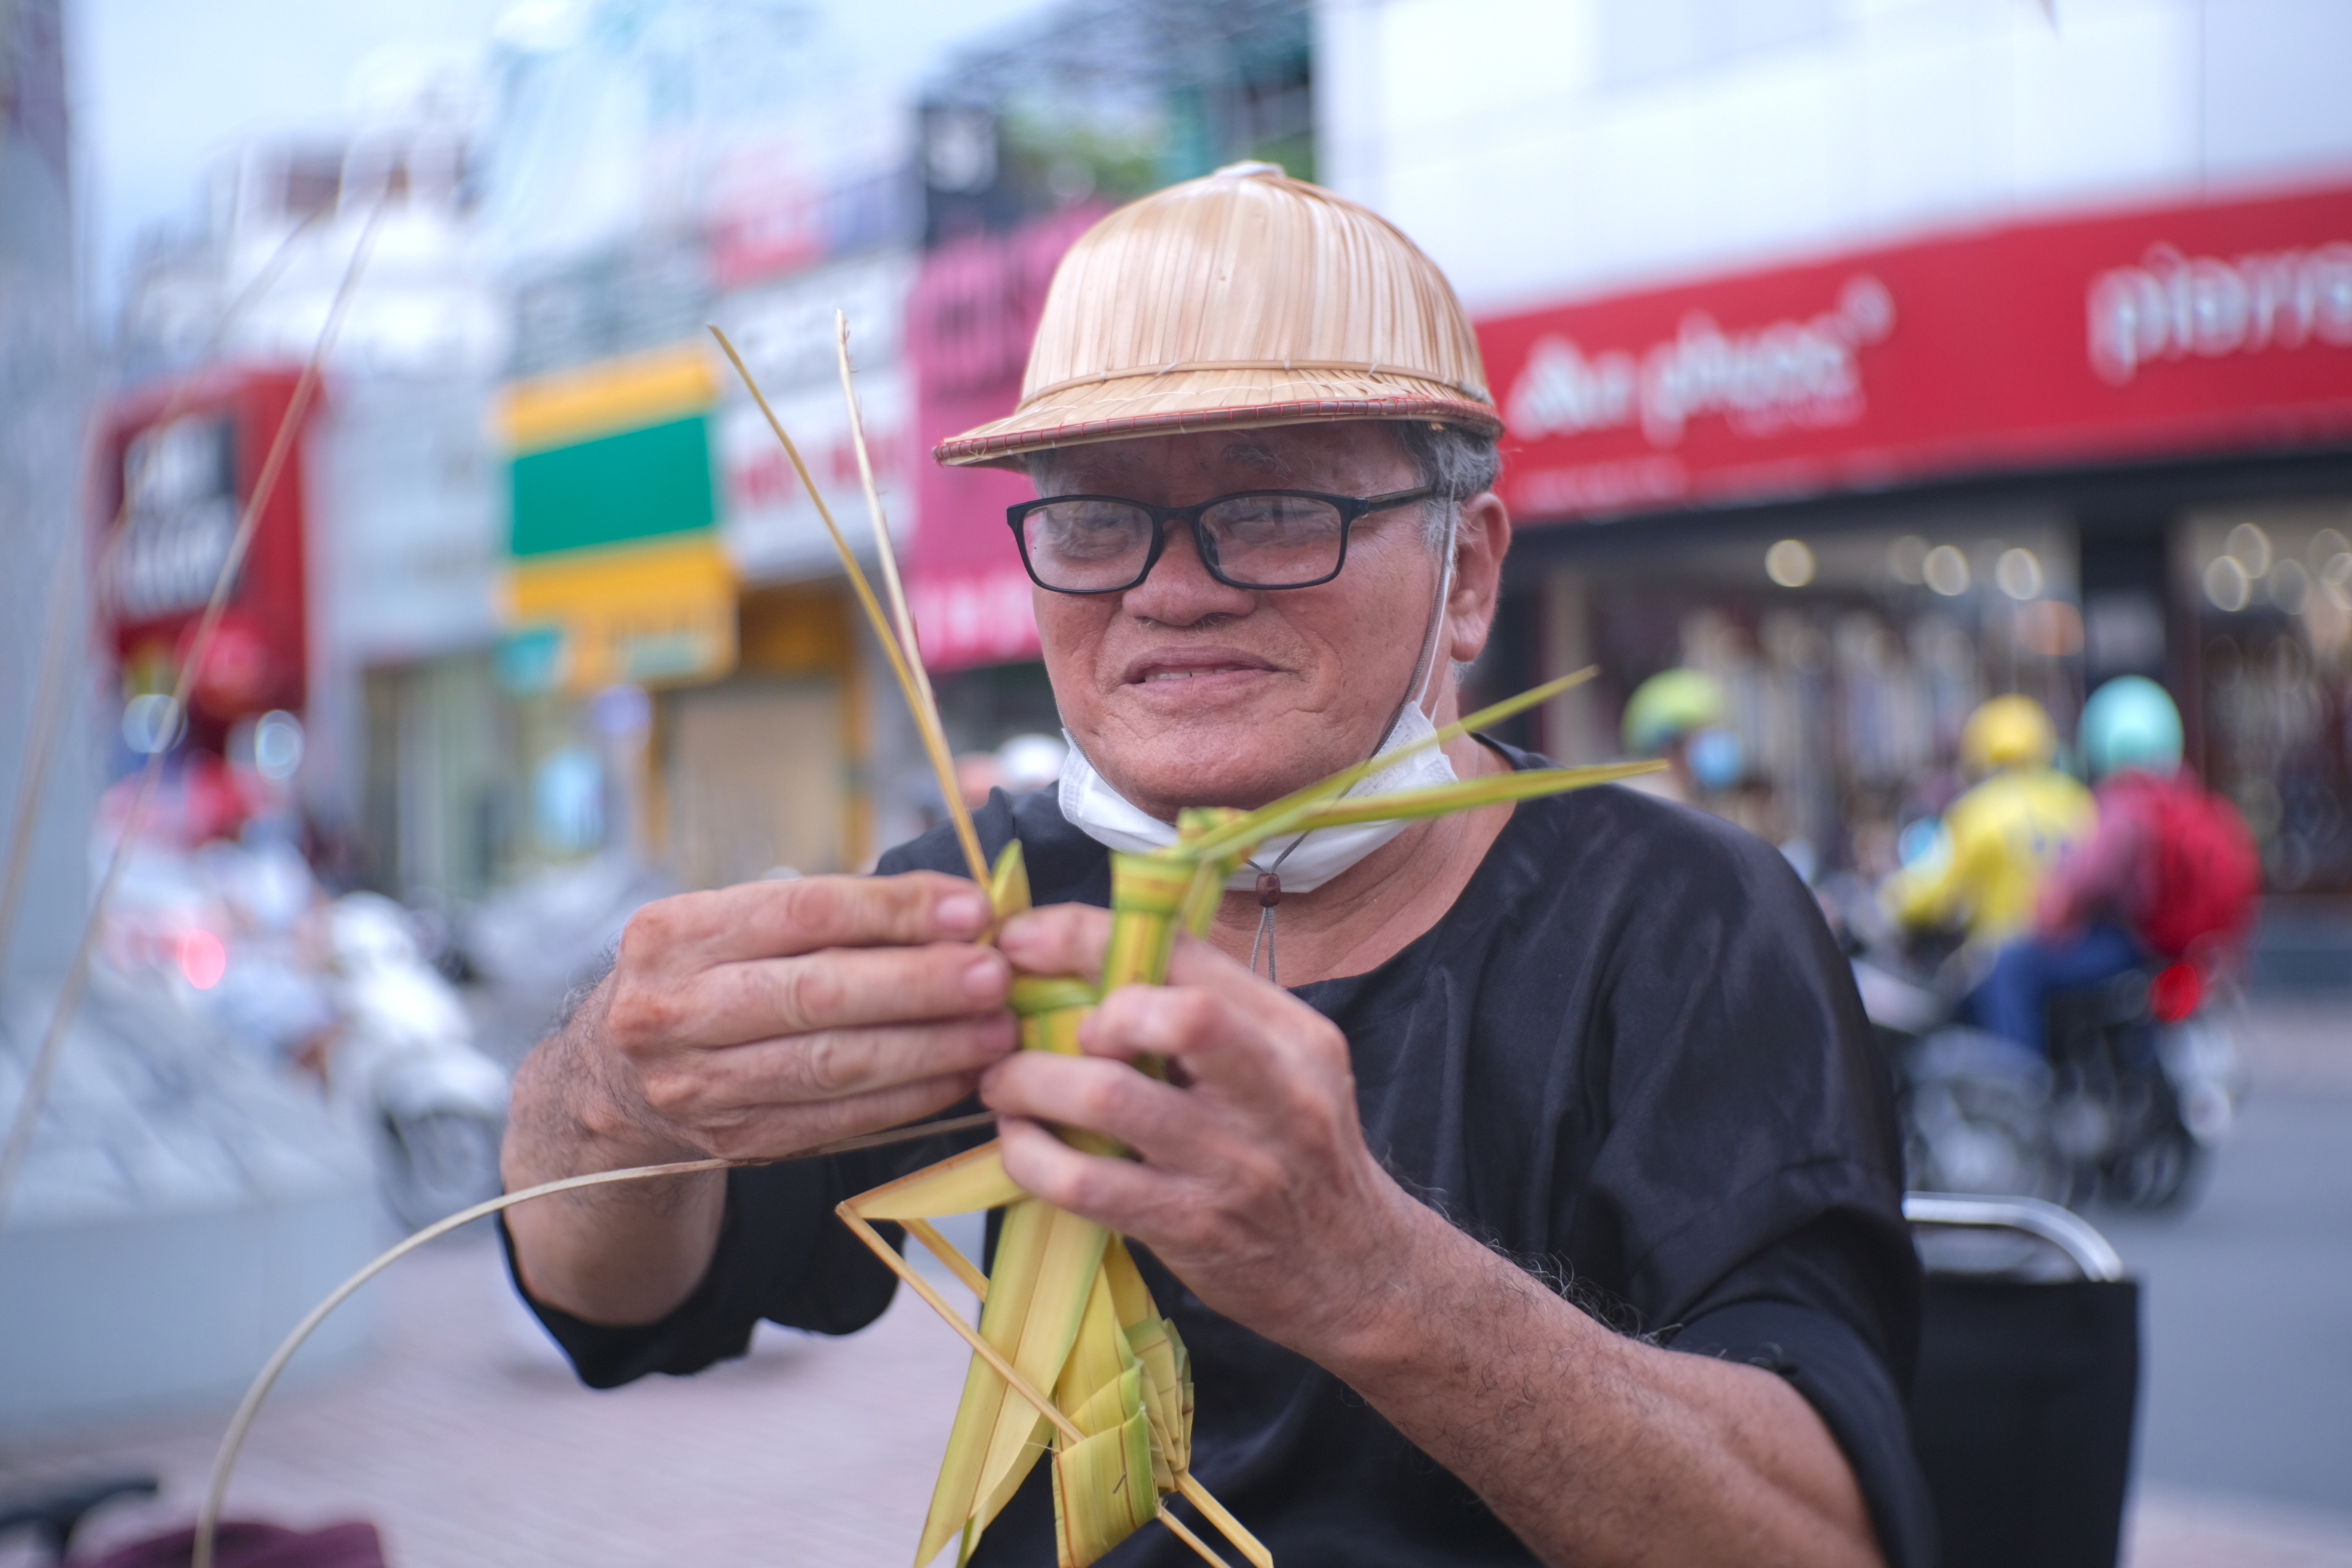 Le Minh, 70, makes a locust from mangrove palm leaf on the street in Ho Chi Minh CIty. Photo: Ngoc Phuong / Tuoi Tre News